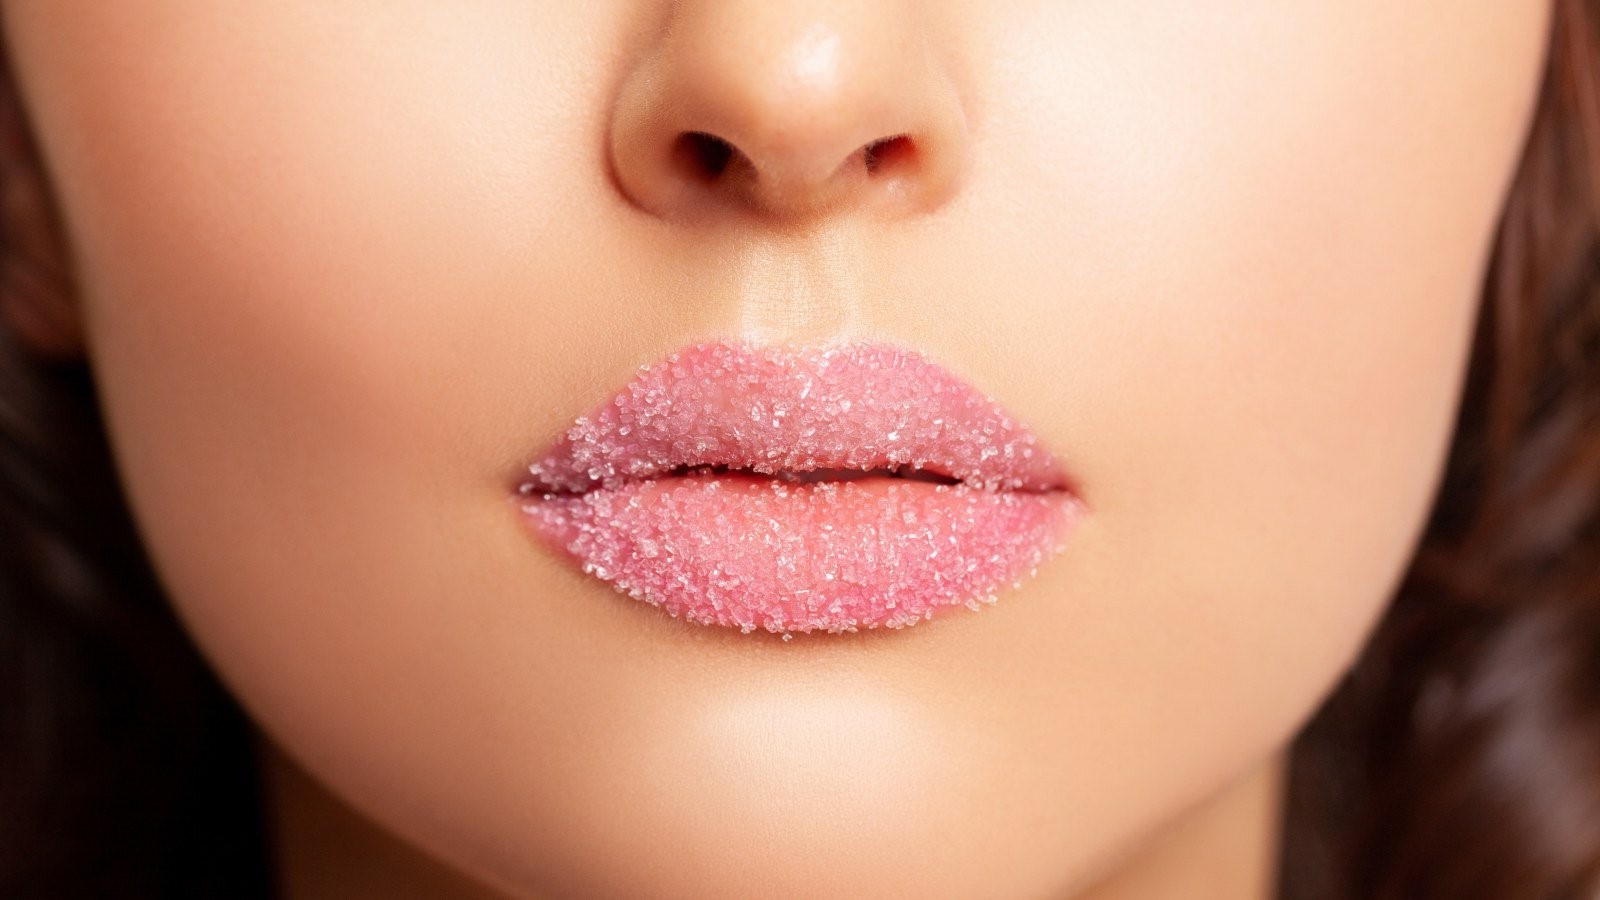 How To Make Your Own DIY Lip Scrub